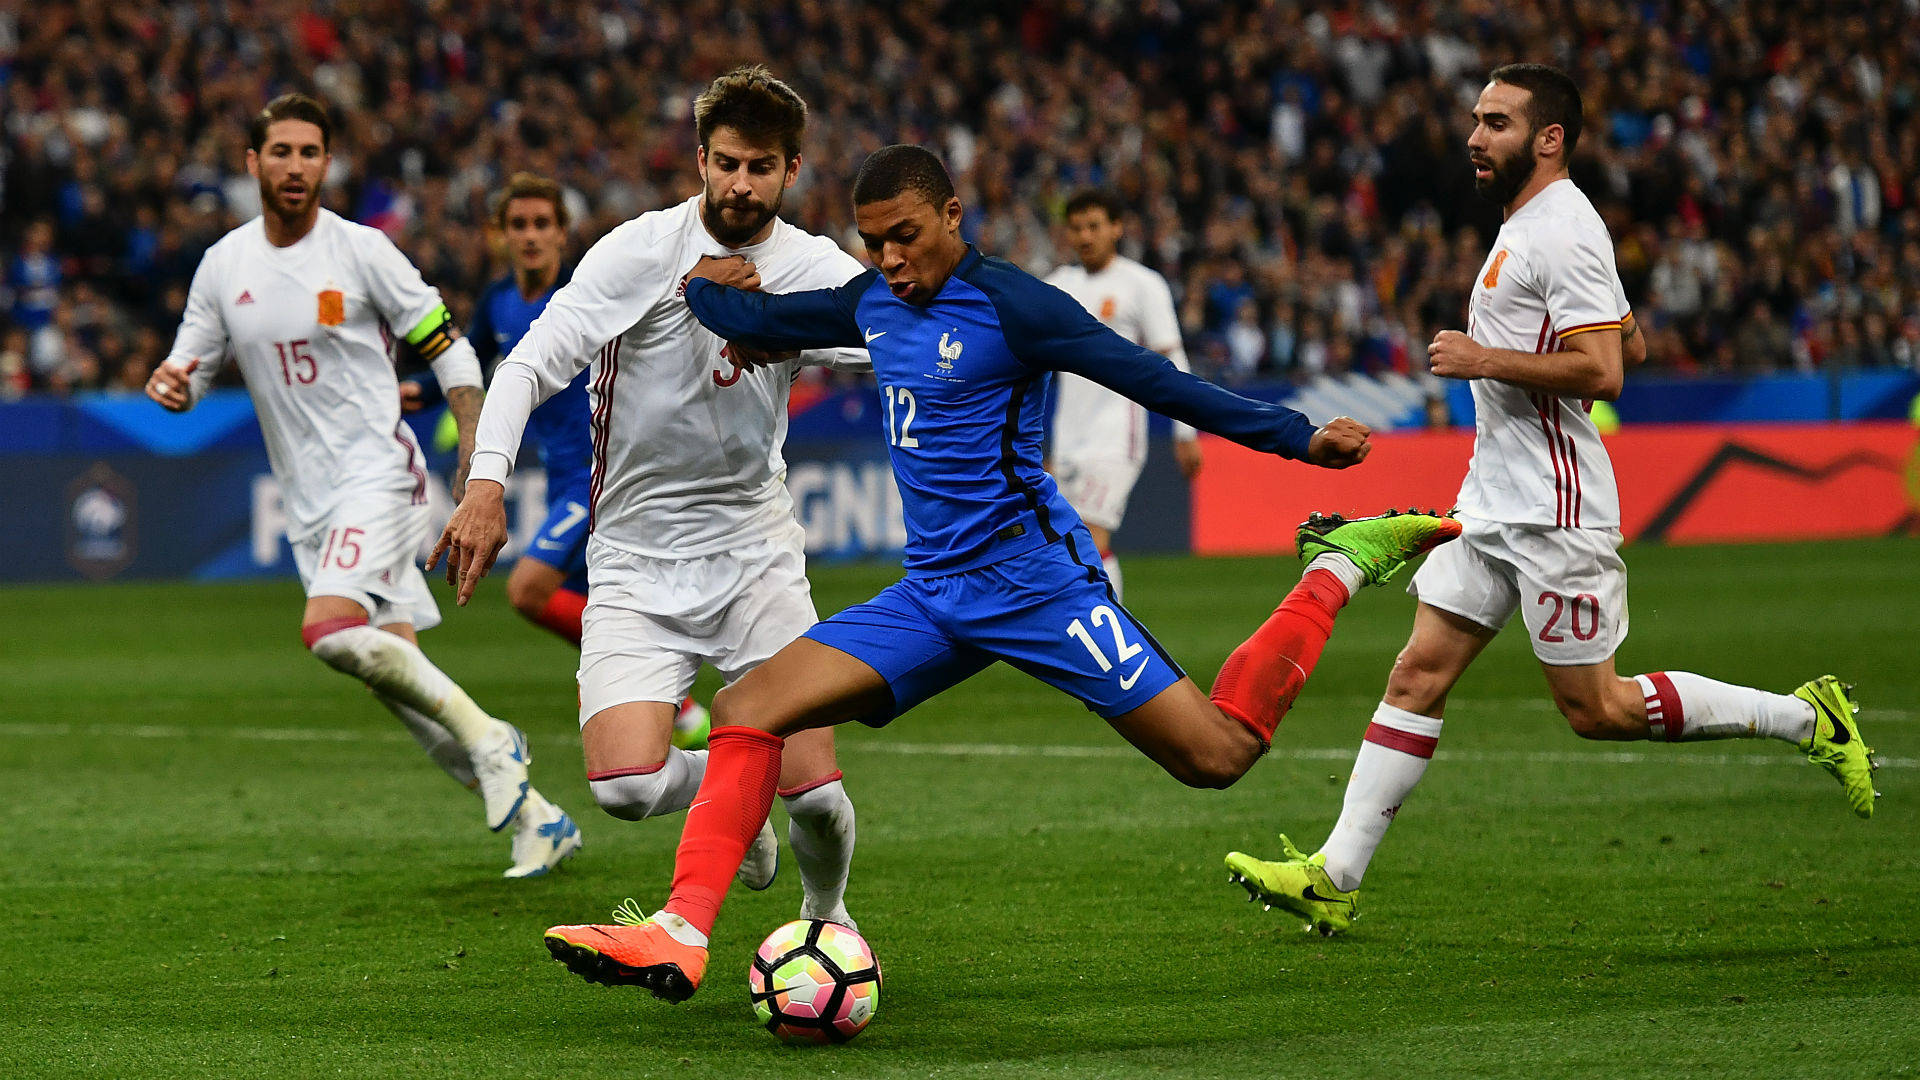 Kylian Mbappe Running With Ball